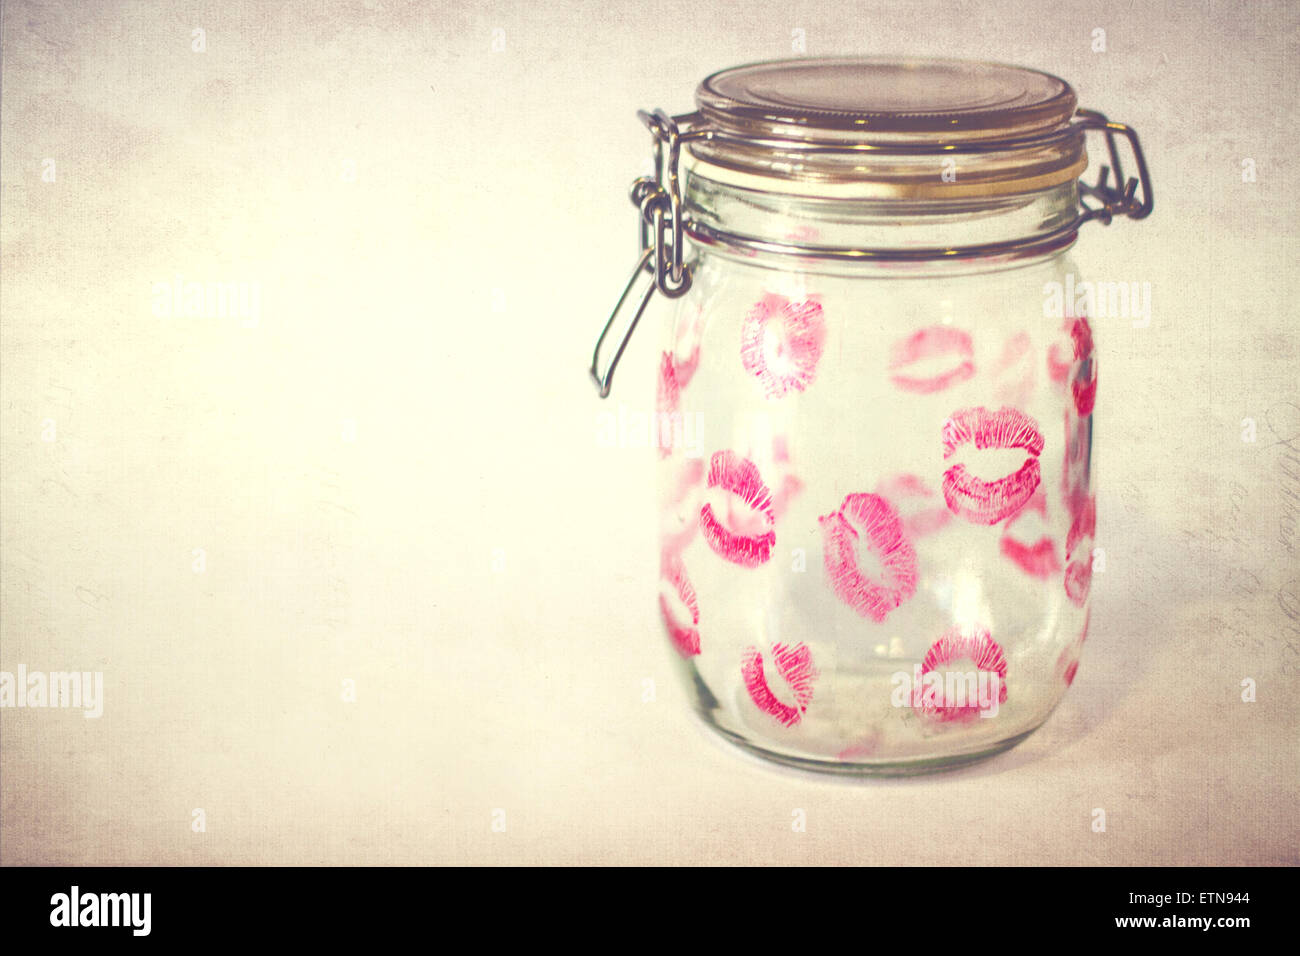 Glass jar covered in  lipstick kisses Stock Photo